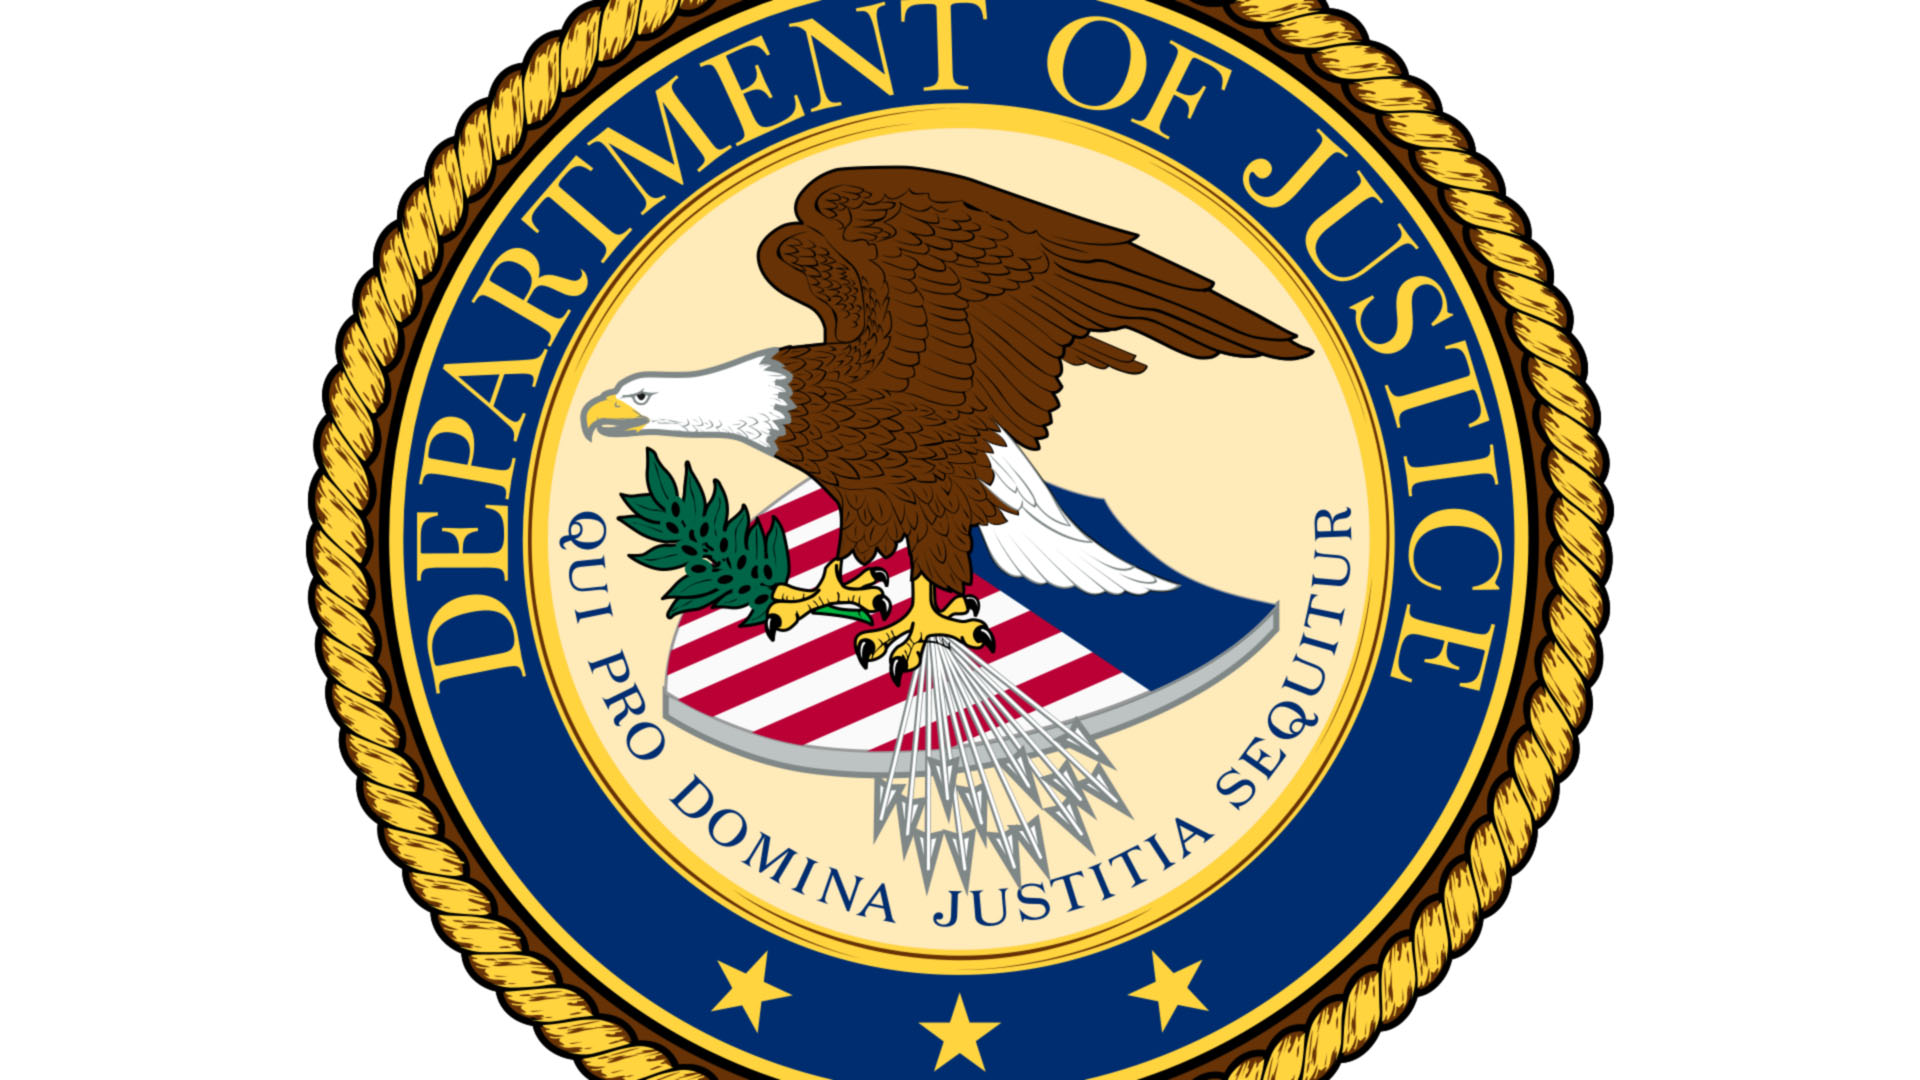 Justice Department Secures Forfeiture of Property Purchased with $3.5 Million in Alleged Corruption Proceeds Linked to Ex-President of The Gambia